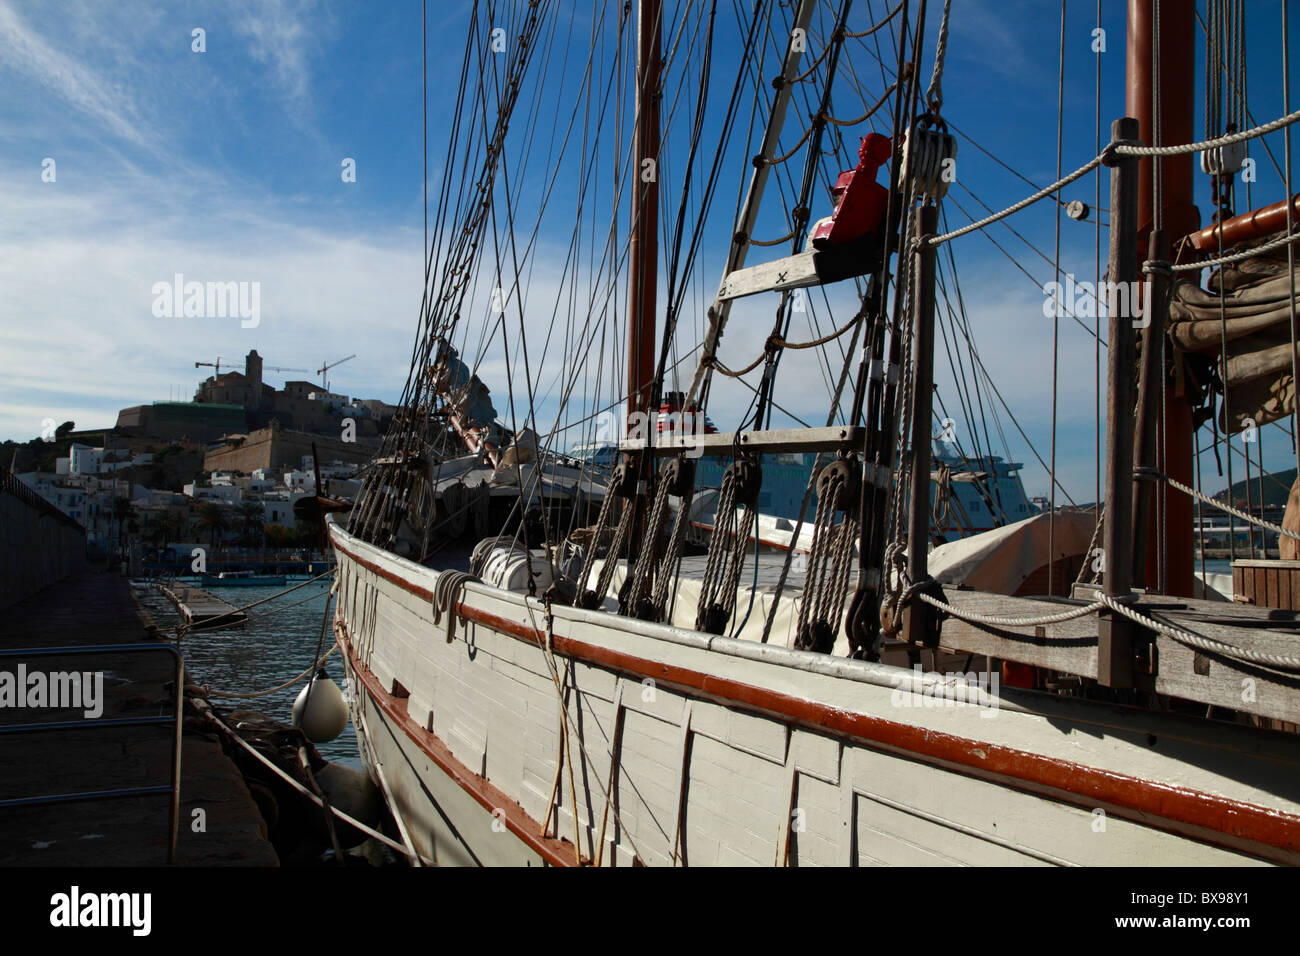 Partial view of a shooner (Tall Ship) moored at the harbor of Ibiza, Spain Stock Photo